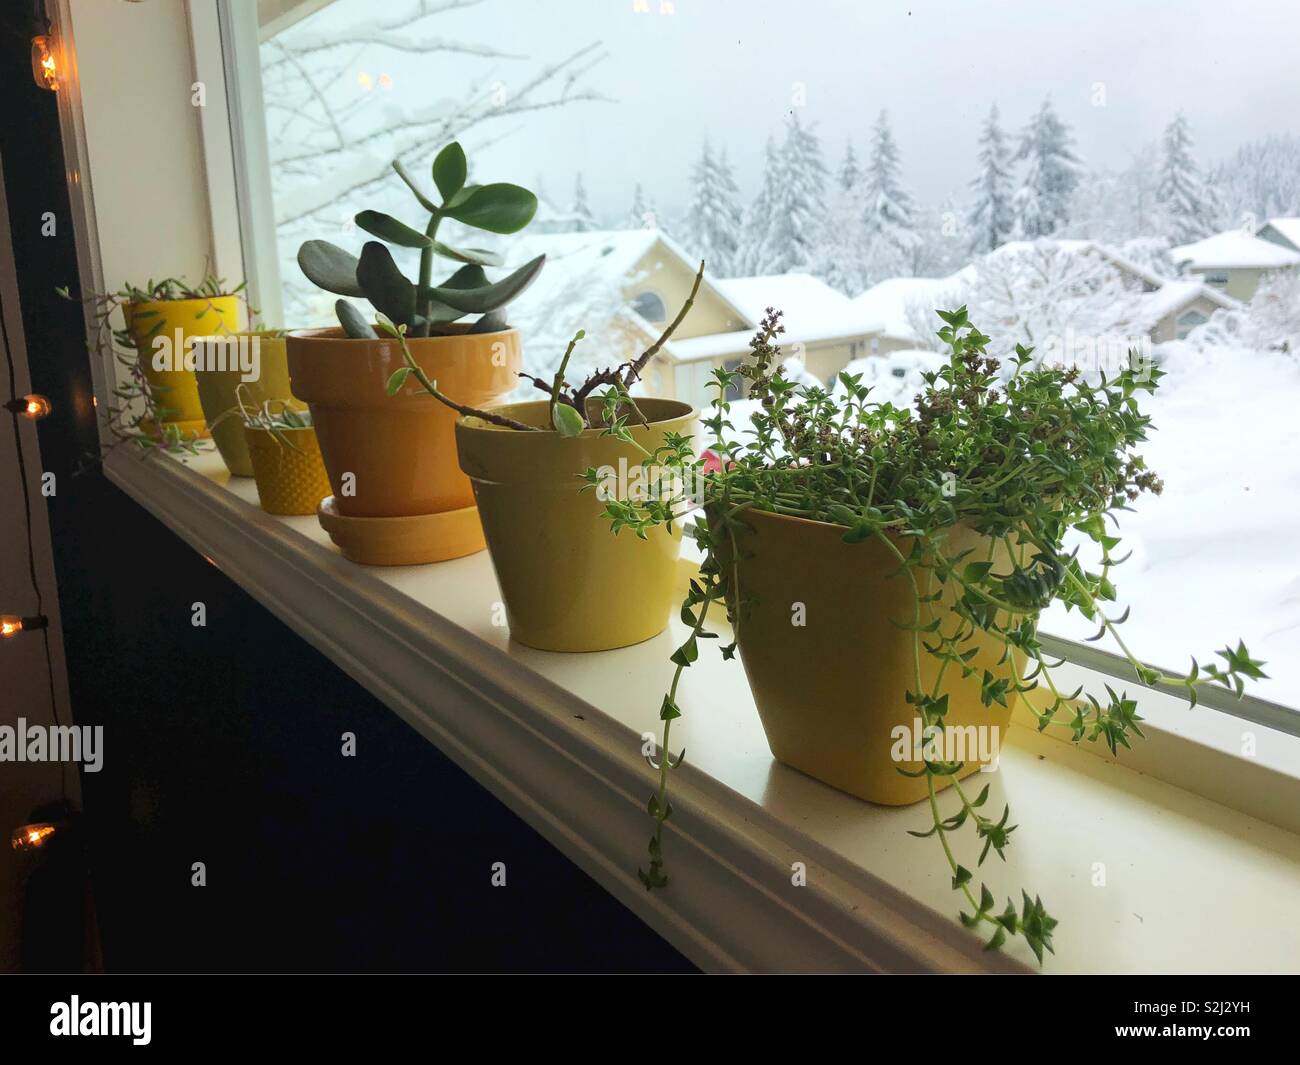 A window with plants in yellow pots overlooking a snowy scene. Stock Photo